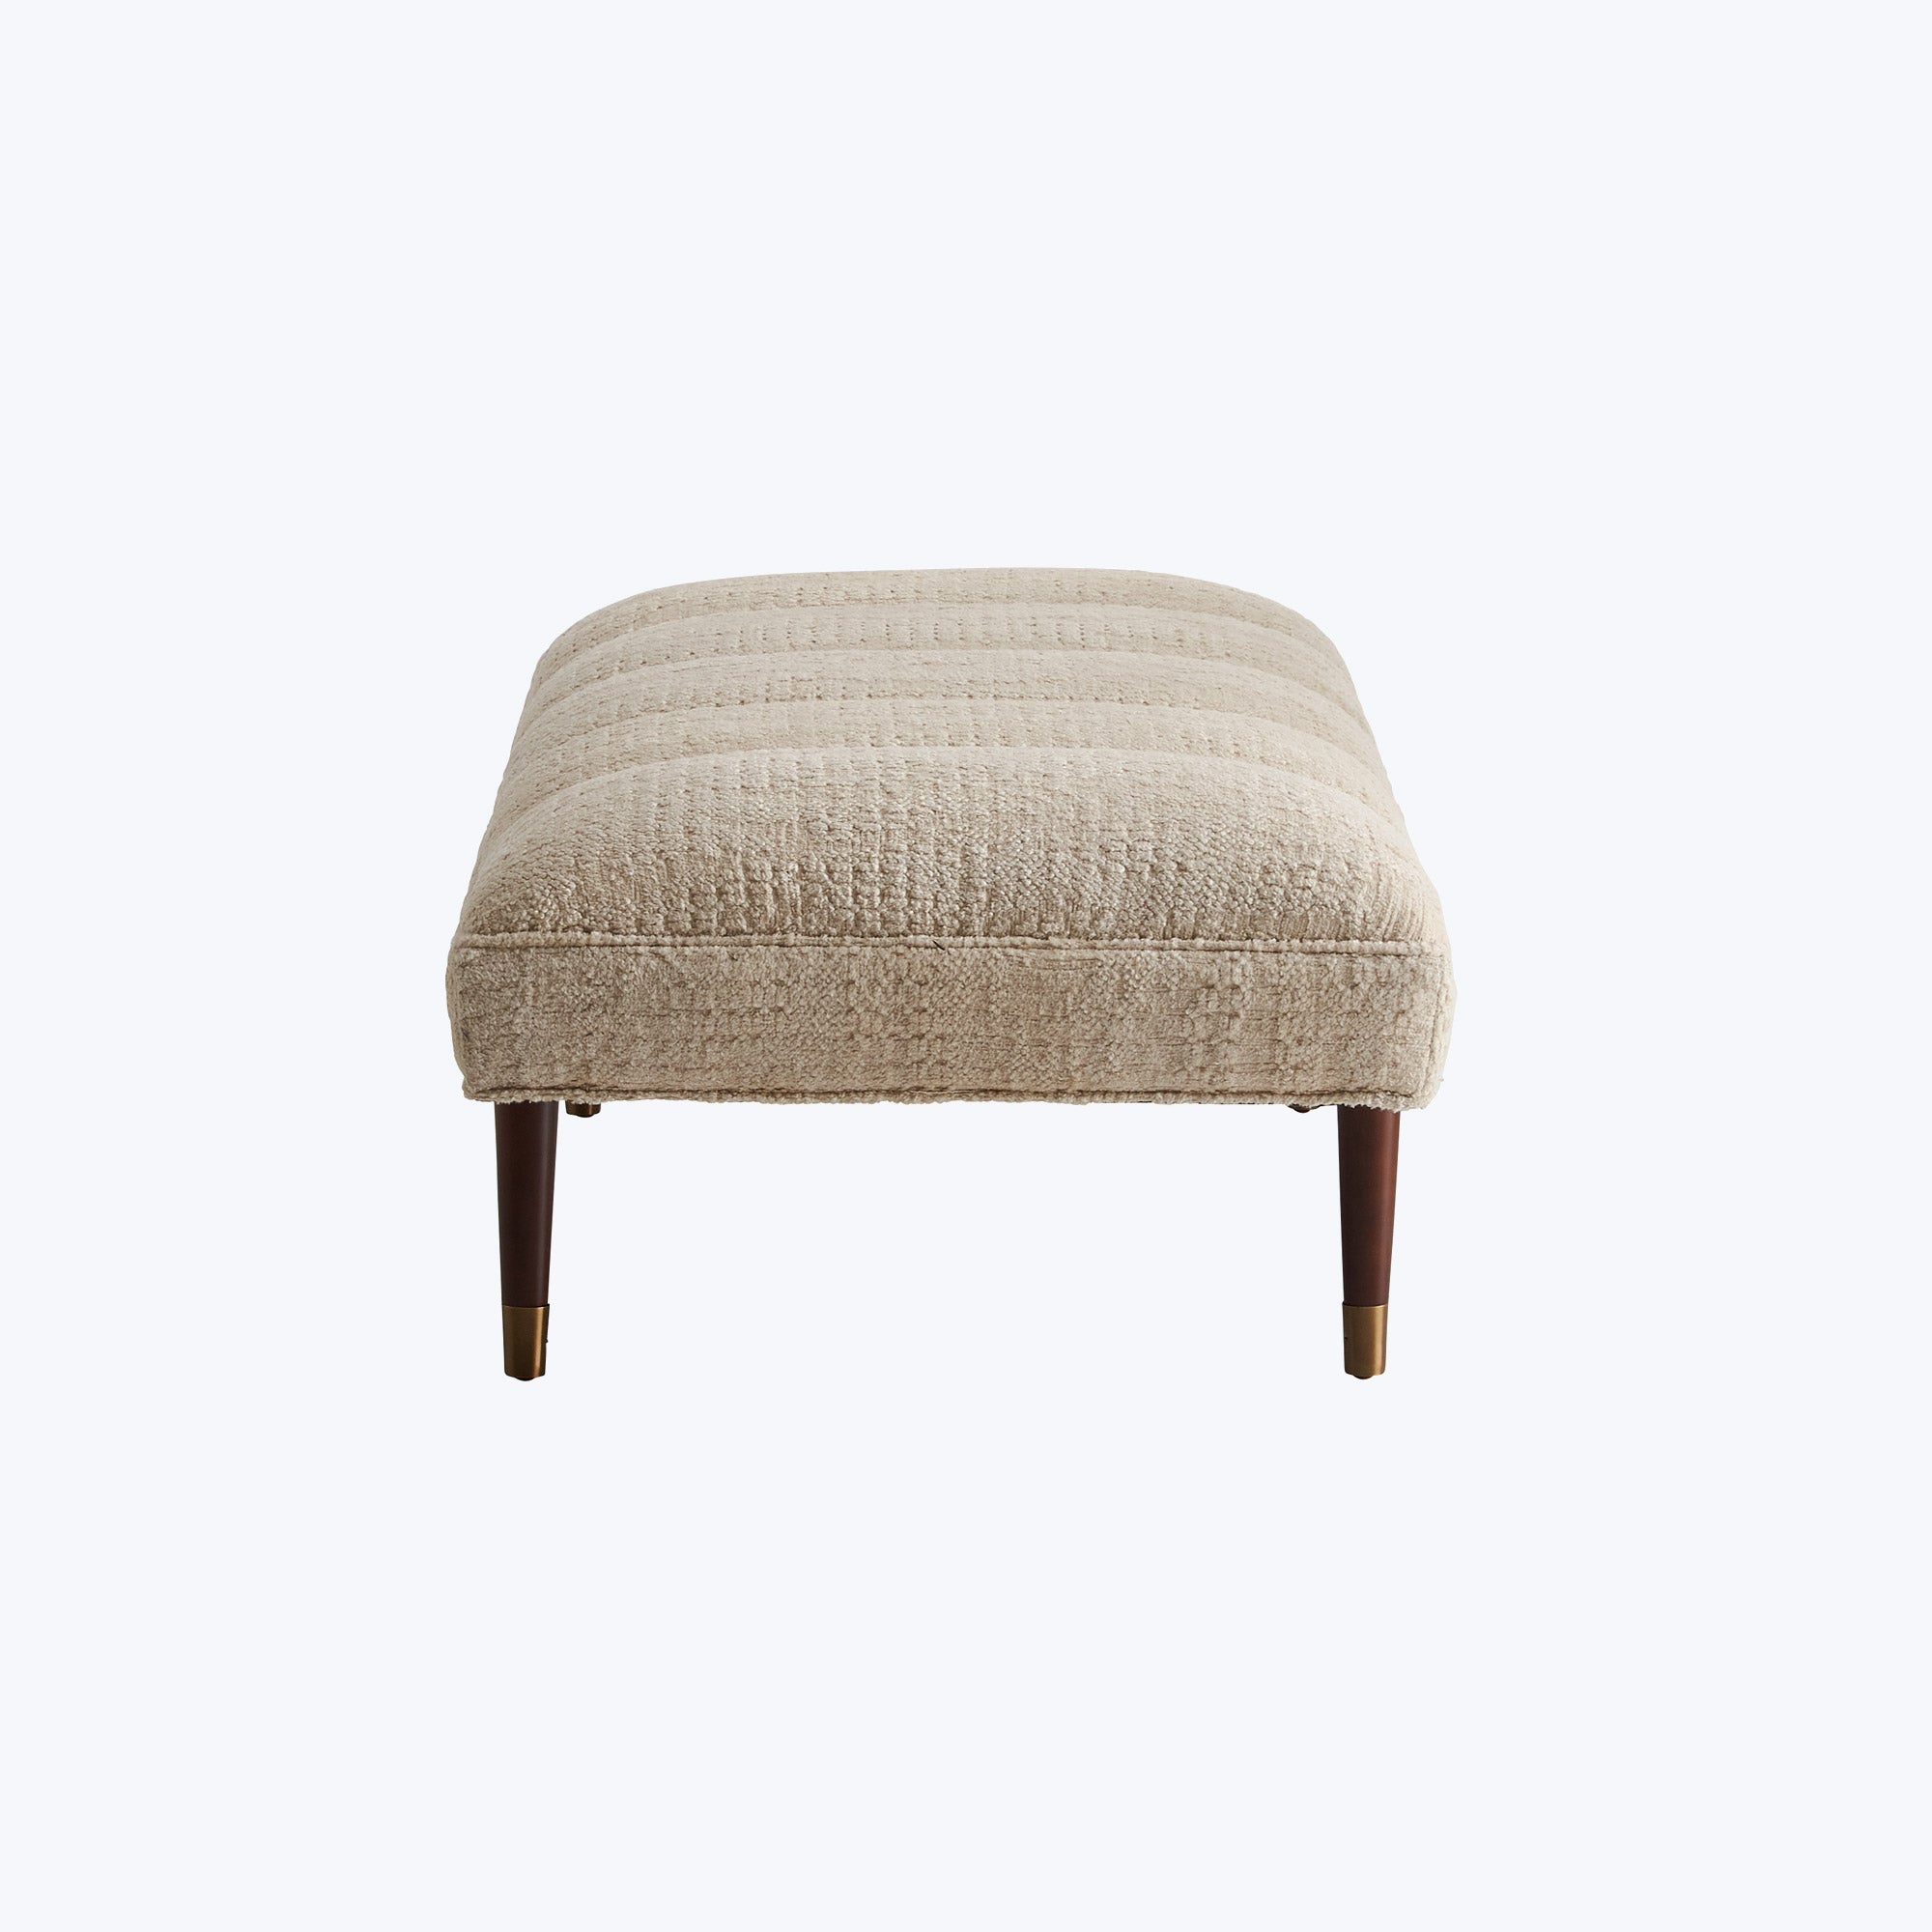 Elegant cream ottoman with textured upholstery and wooden tapered legs.